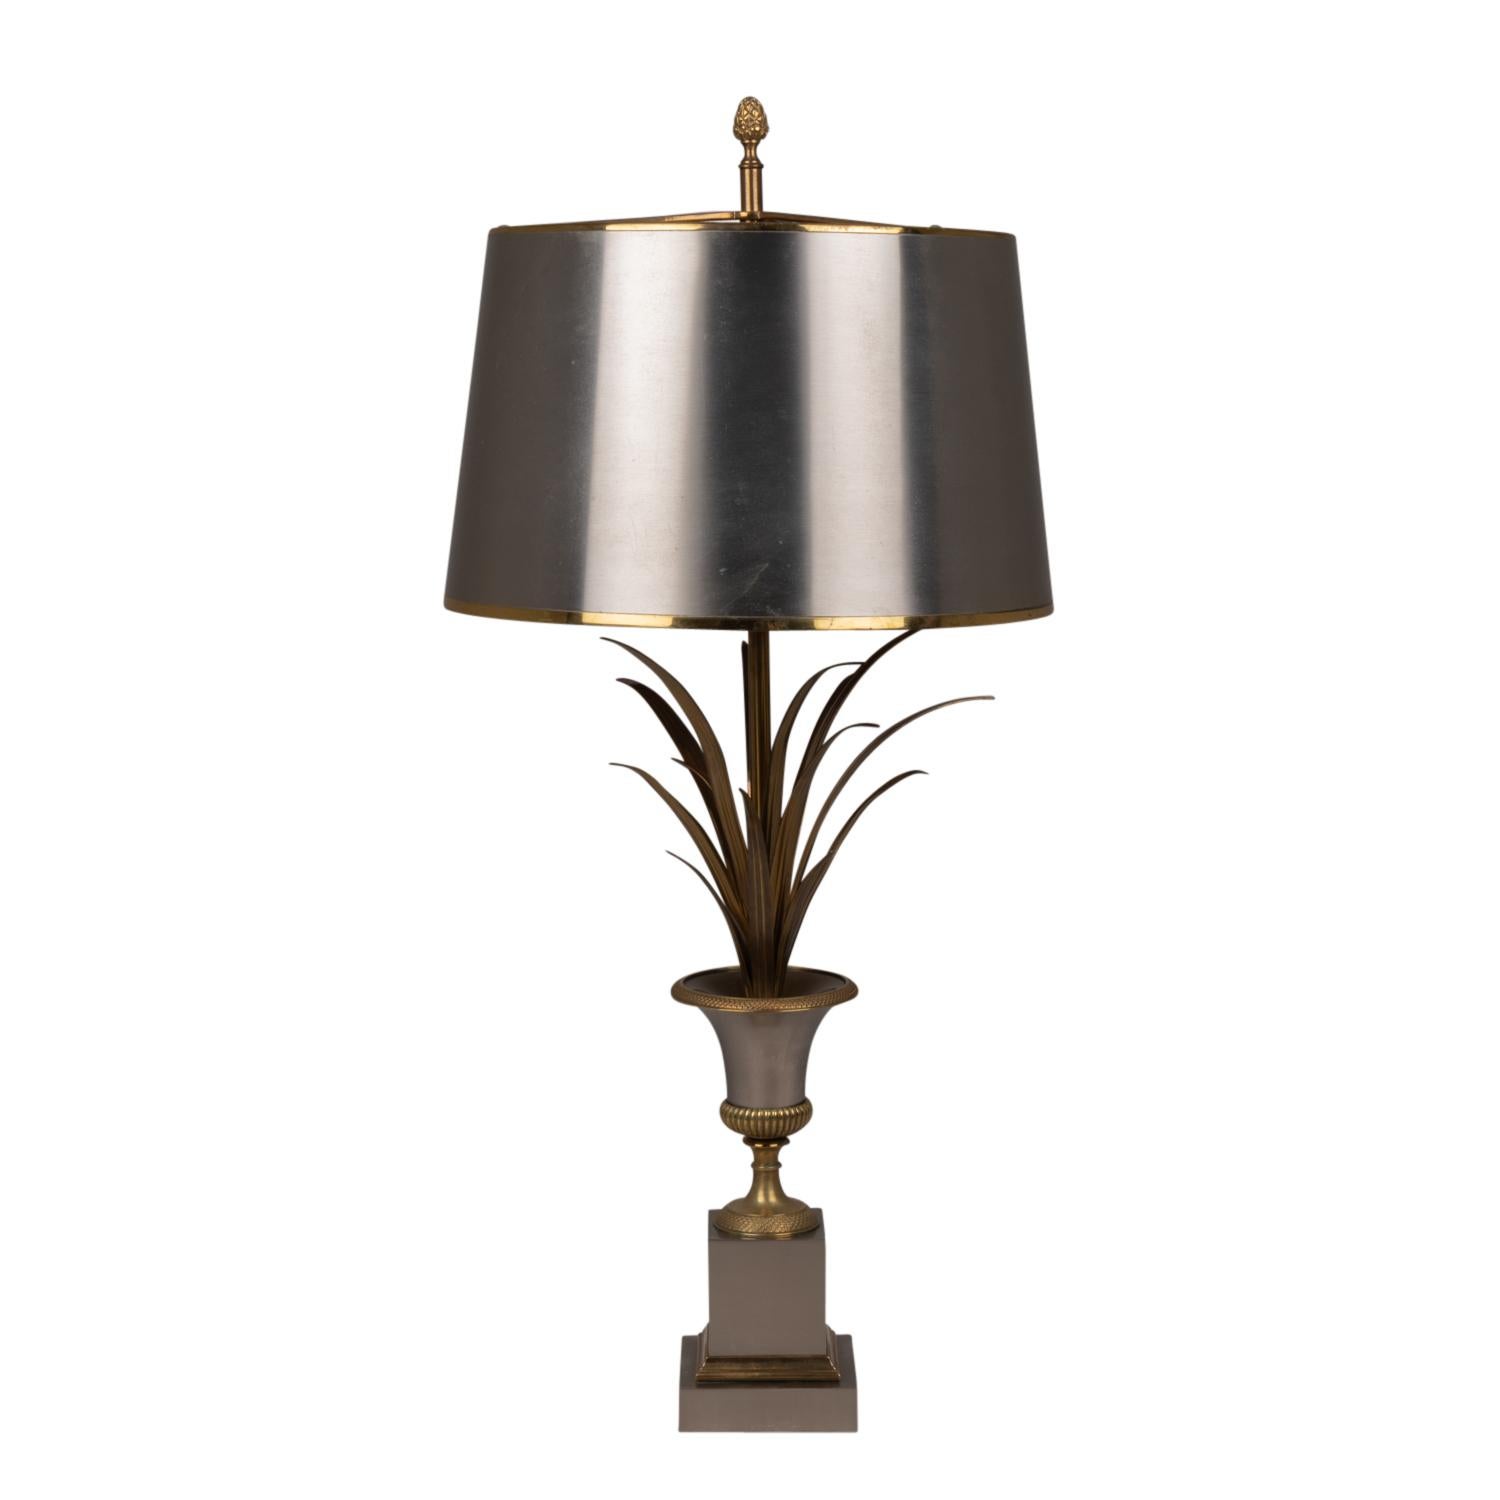 Maison Charles, signed.

Lamp, “Vase reeds” model, in silvered and gilded bronze, the reeds in a Medici-shaped vase, with its original lampshade in sheet metal. Square shaped base.

French work realized in the 1970s.

Referenced 2359 in the catalog